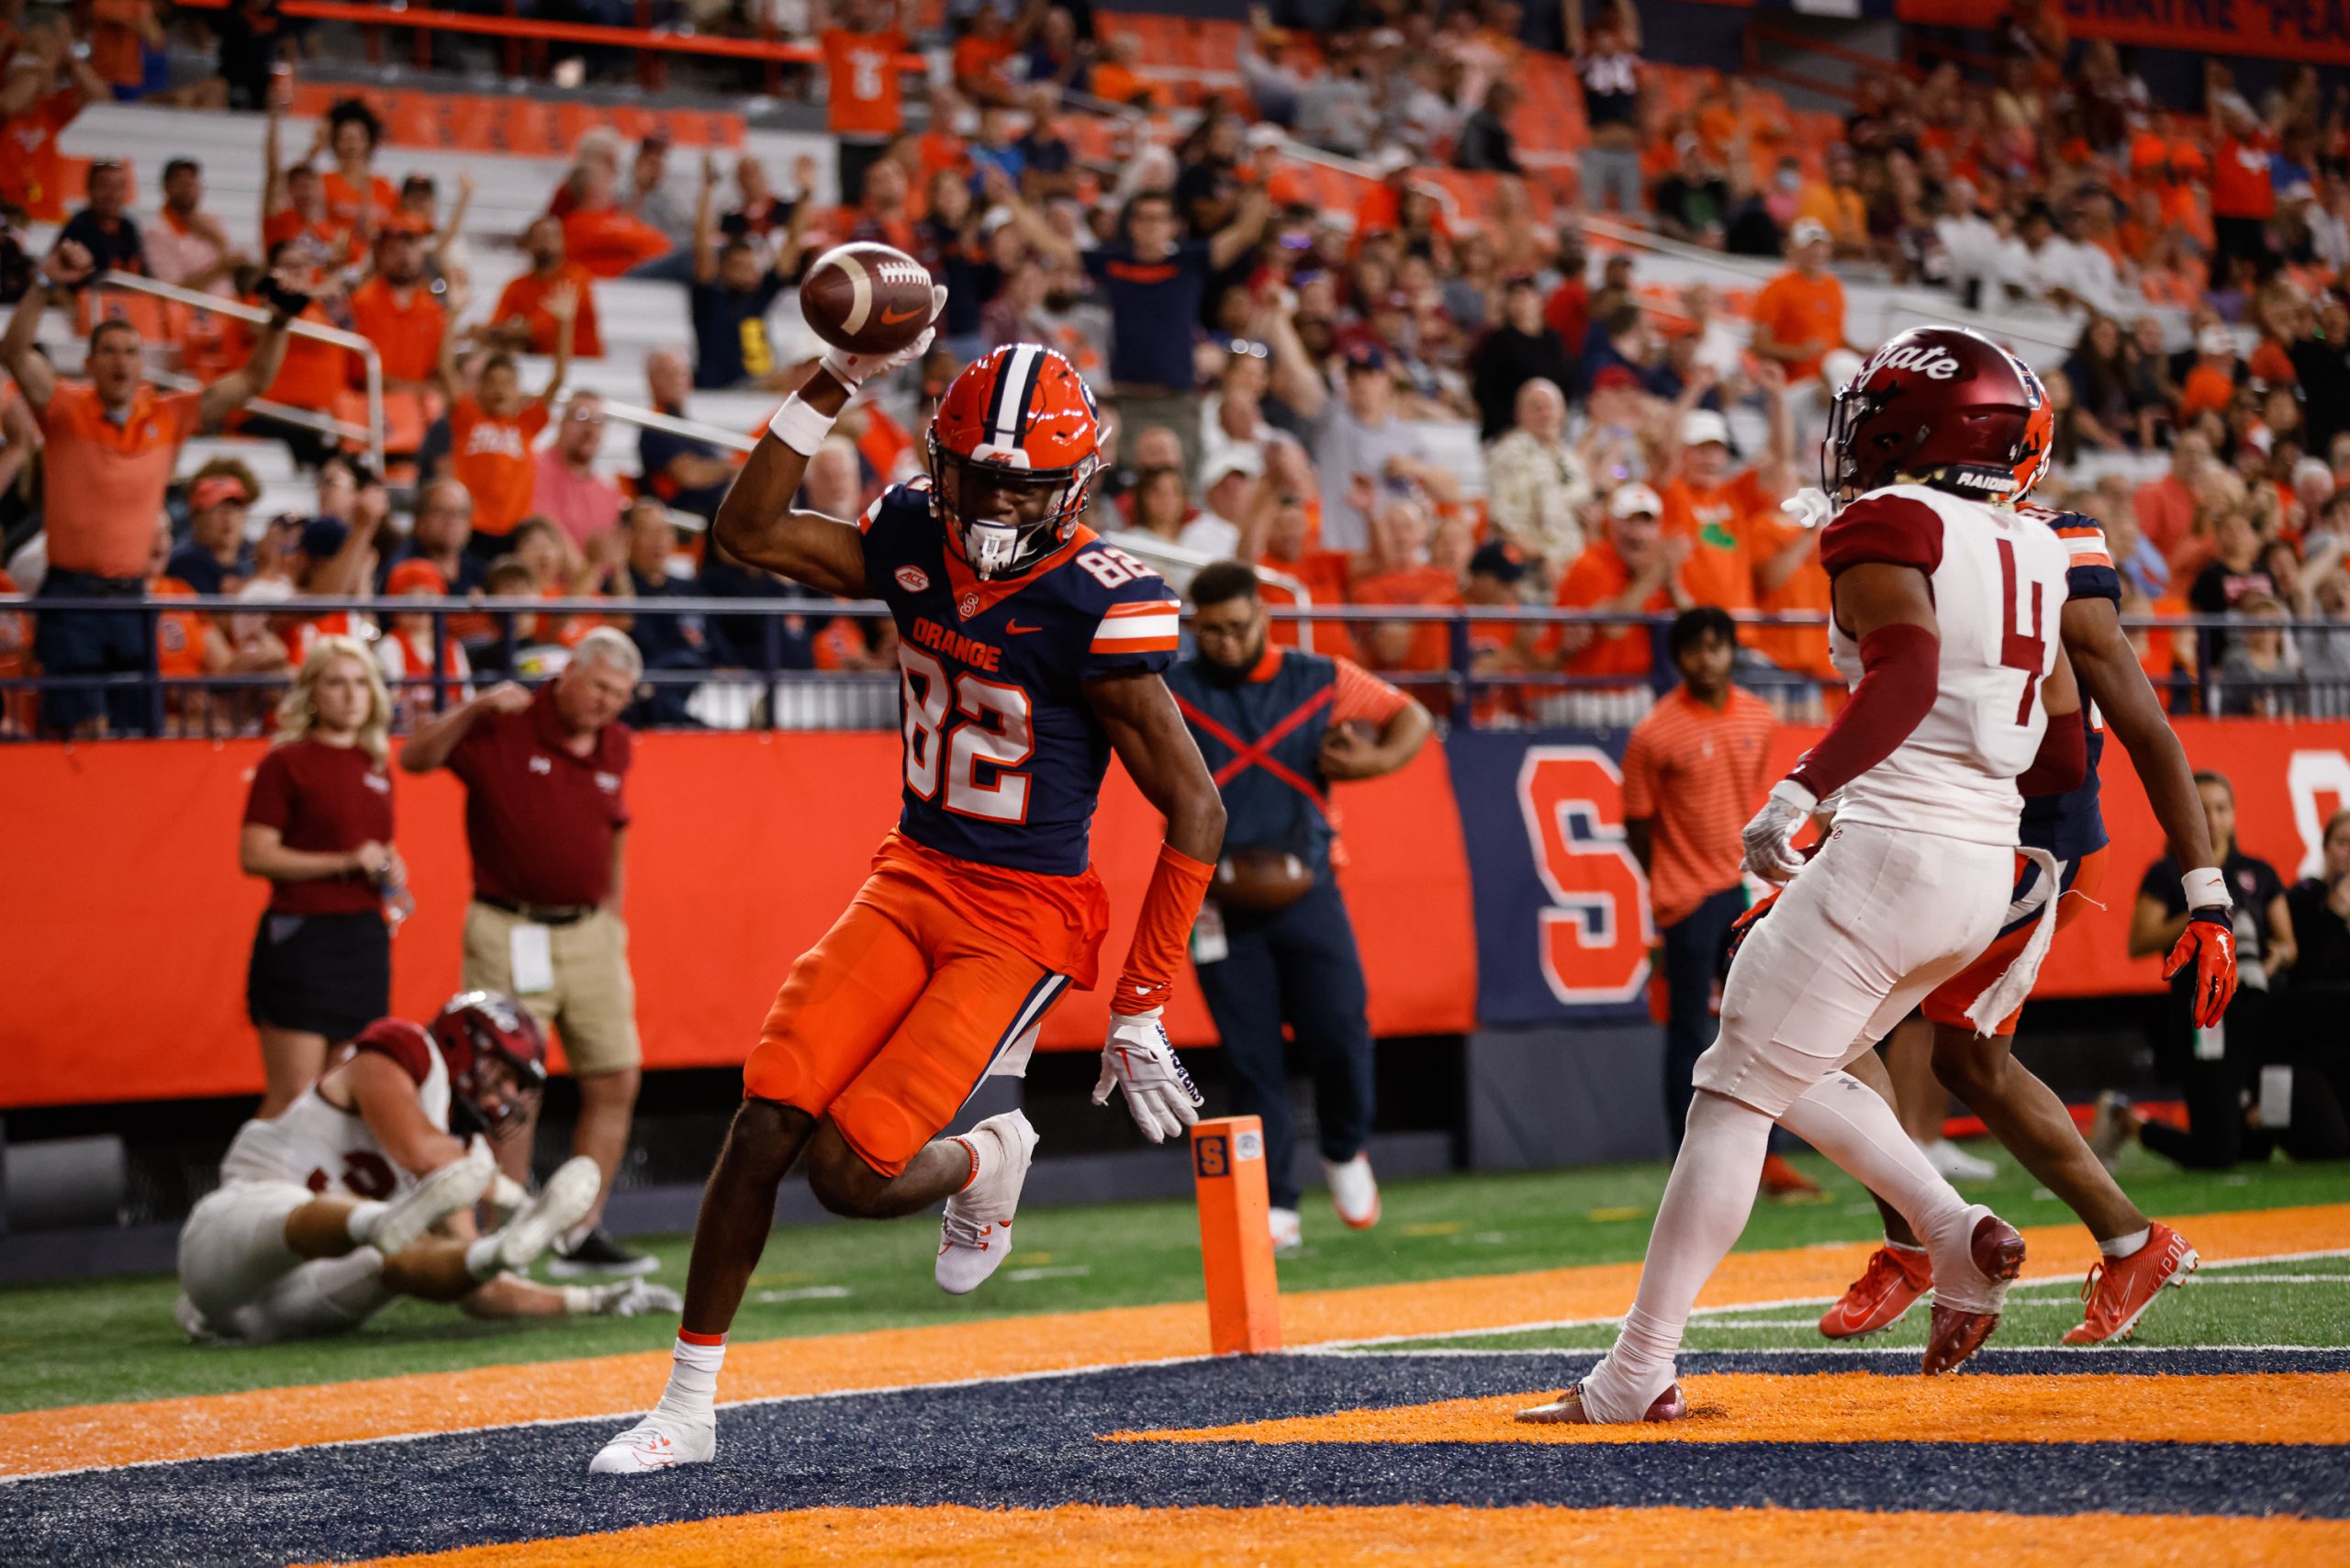 Syracuse's Darrell Gill Jr. (82) celebrates a touchdown during the season opening game against Colgate on September 2, 2023 at JMA Wireless Dome. Photo by Kayla Breen.